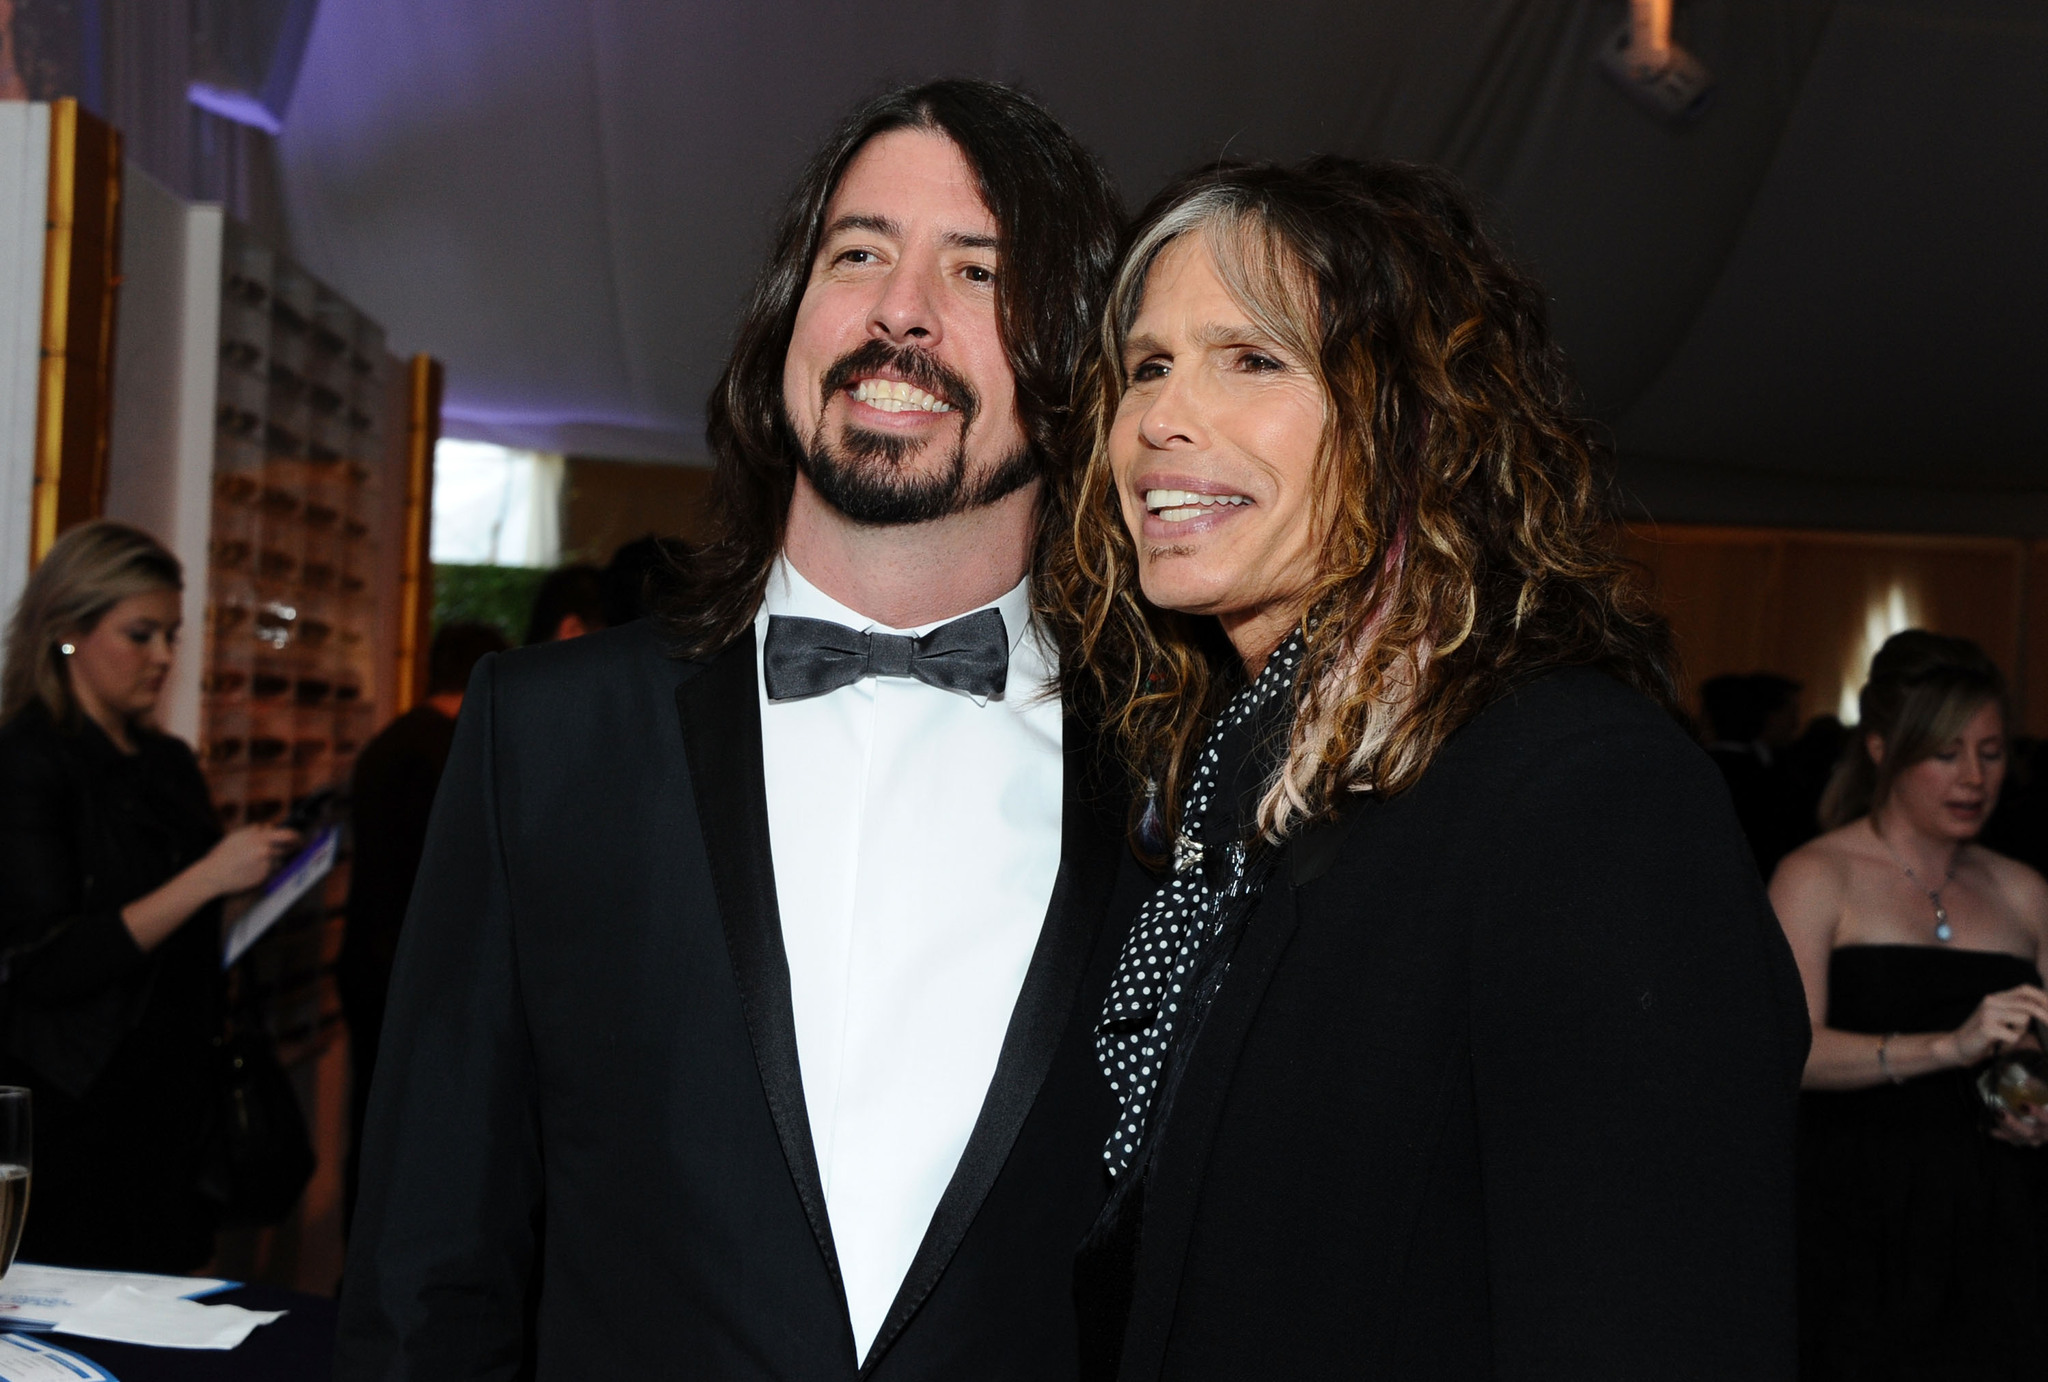 Dave Grohl and Steven Tyler